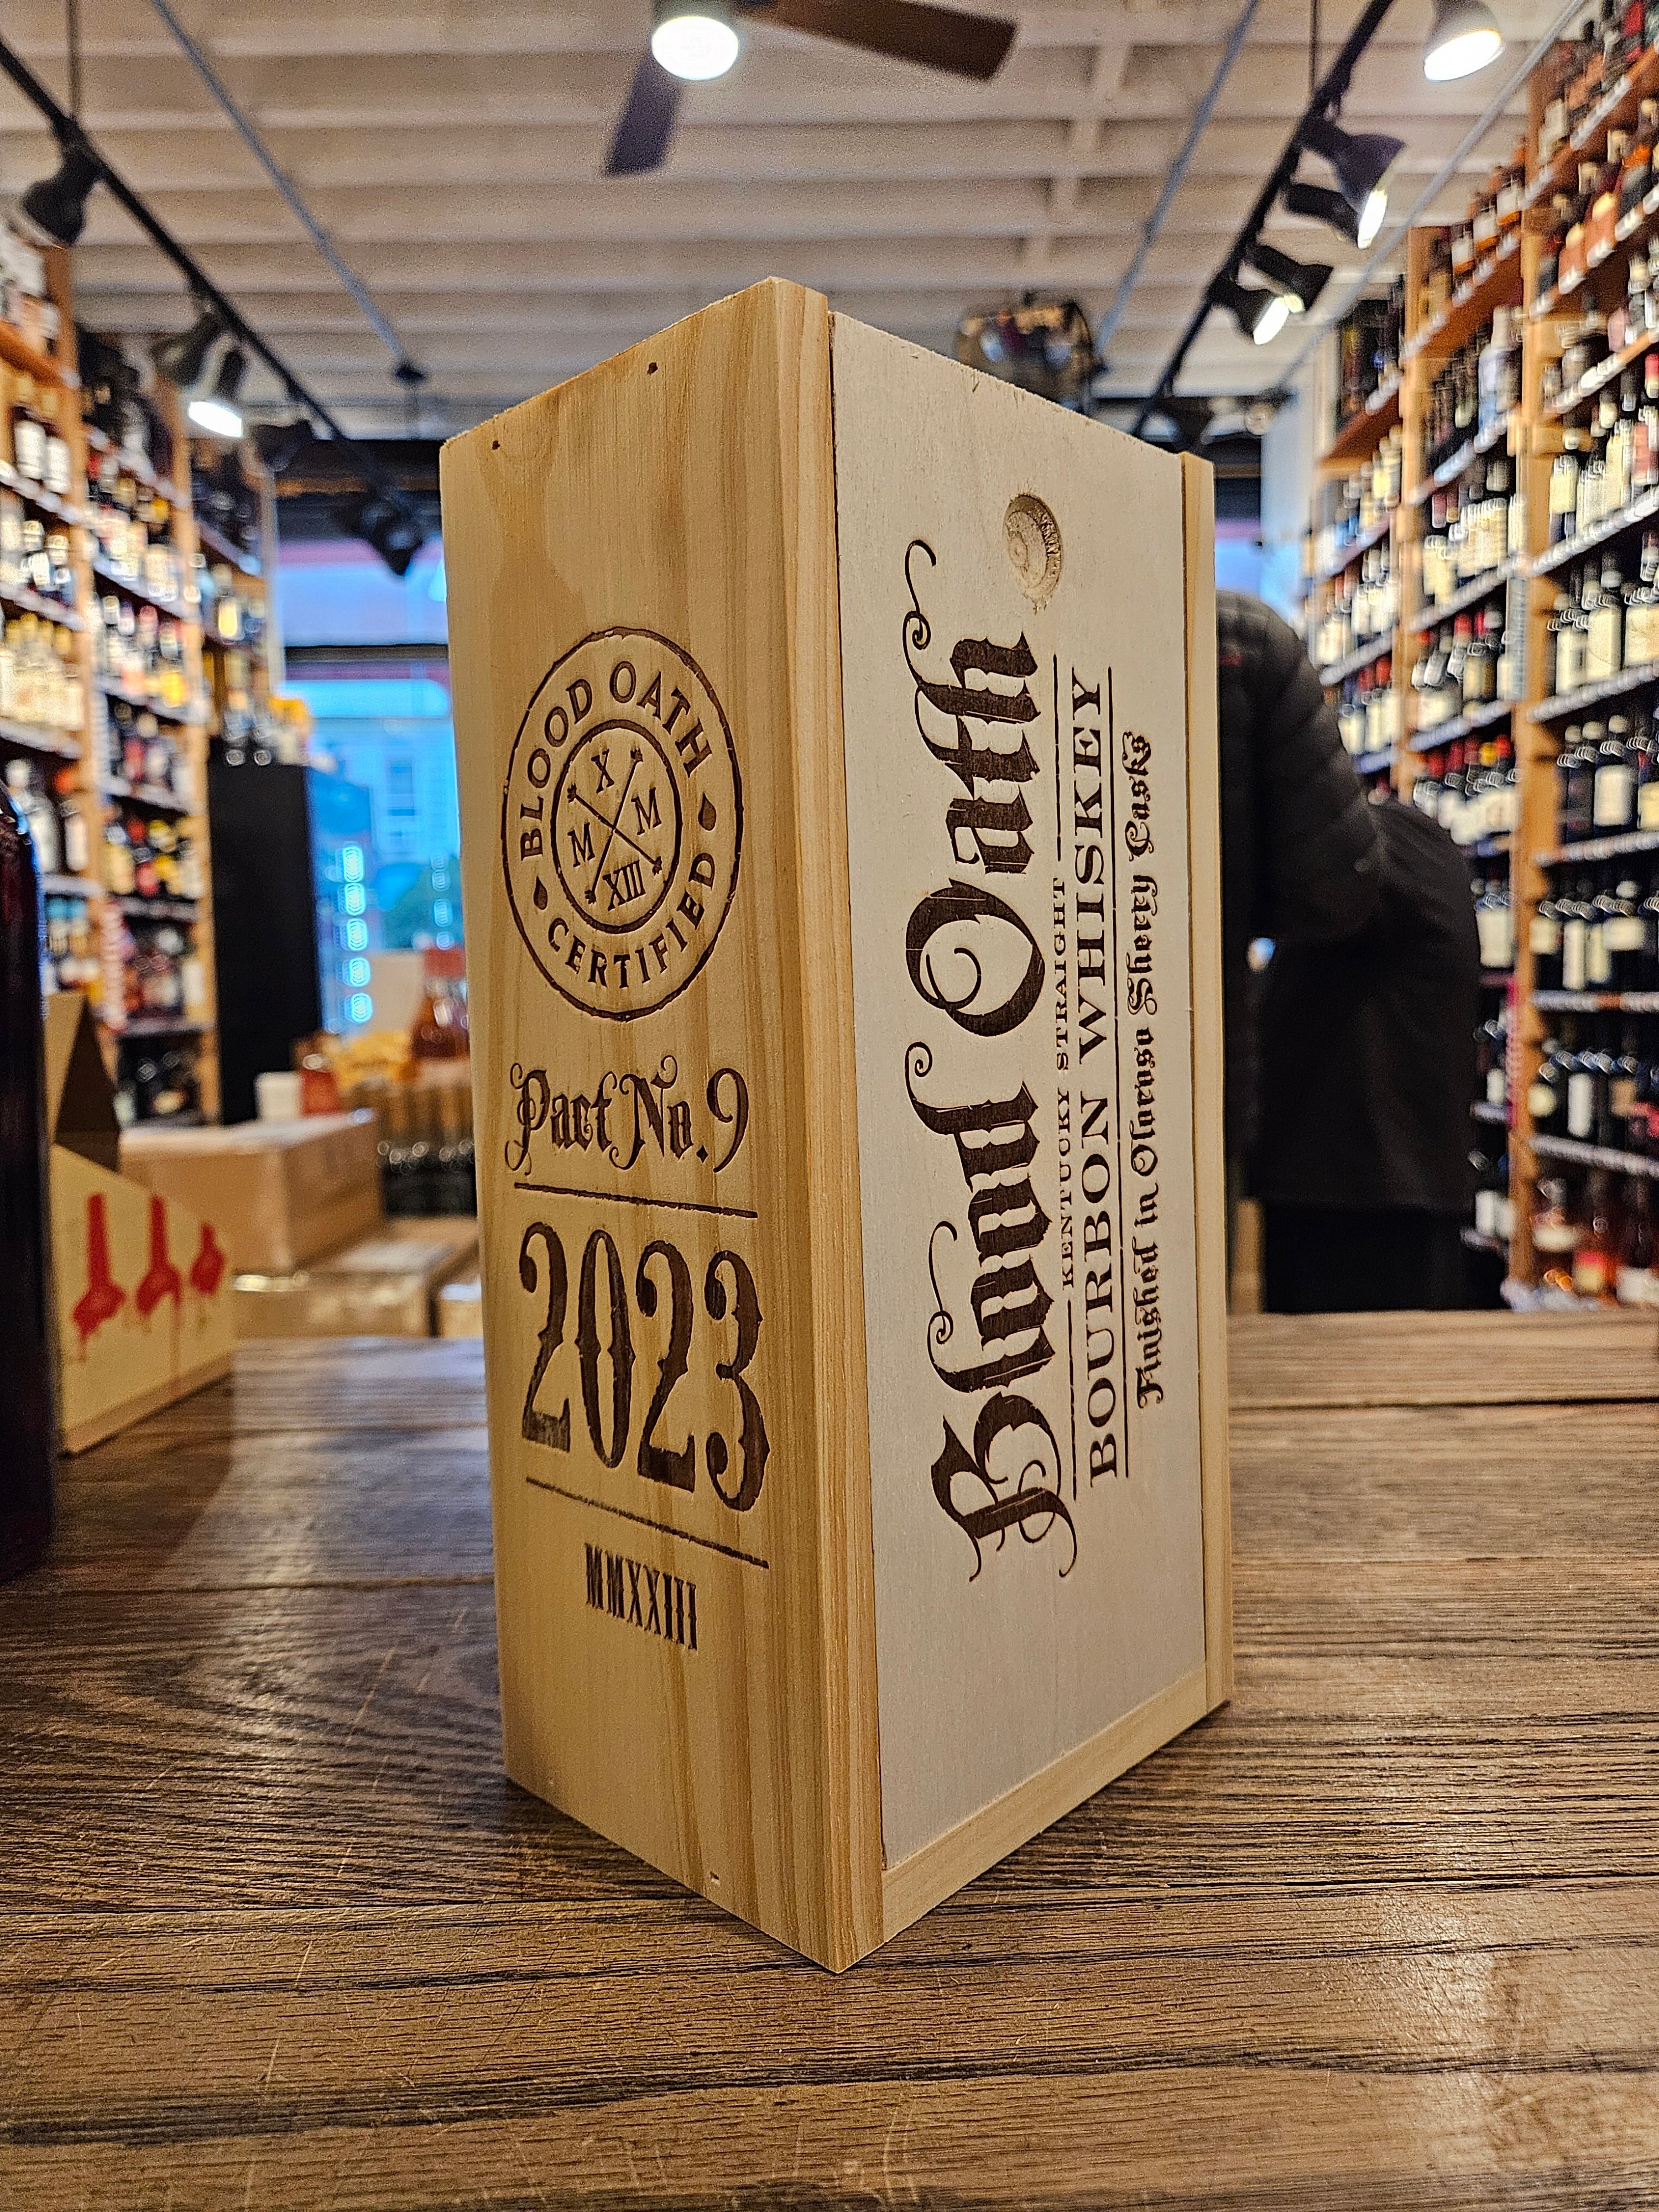 Blood Oath Bourbon Whiskey Pact No 9 750mL a squared wooden box with burnt in lettering 